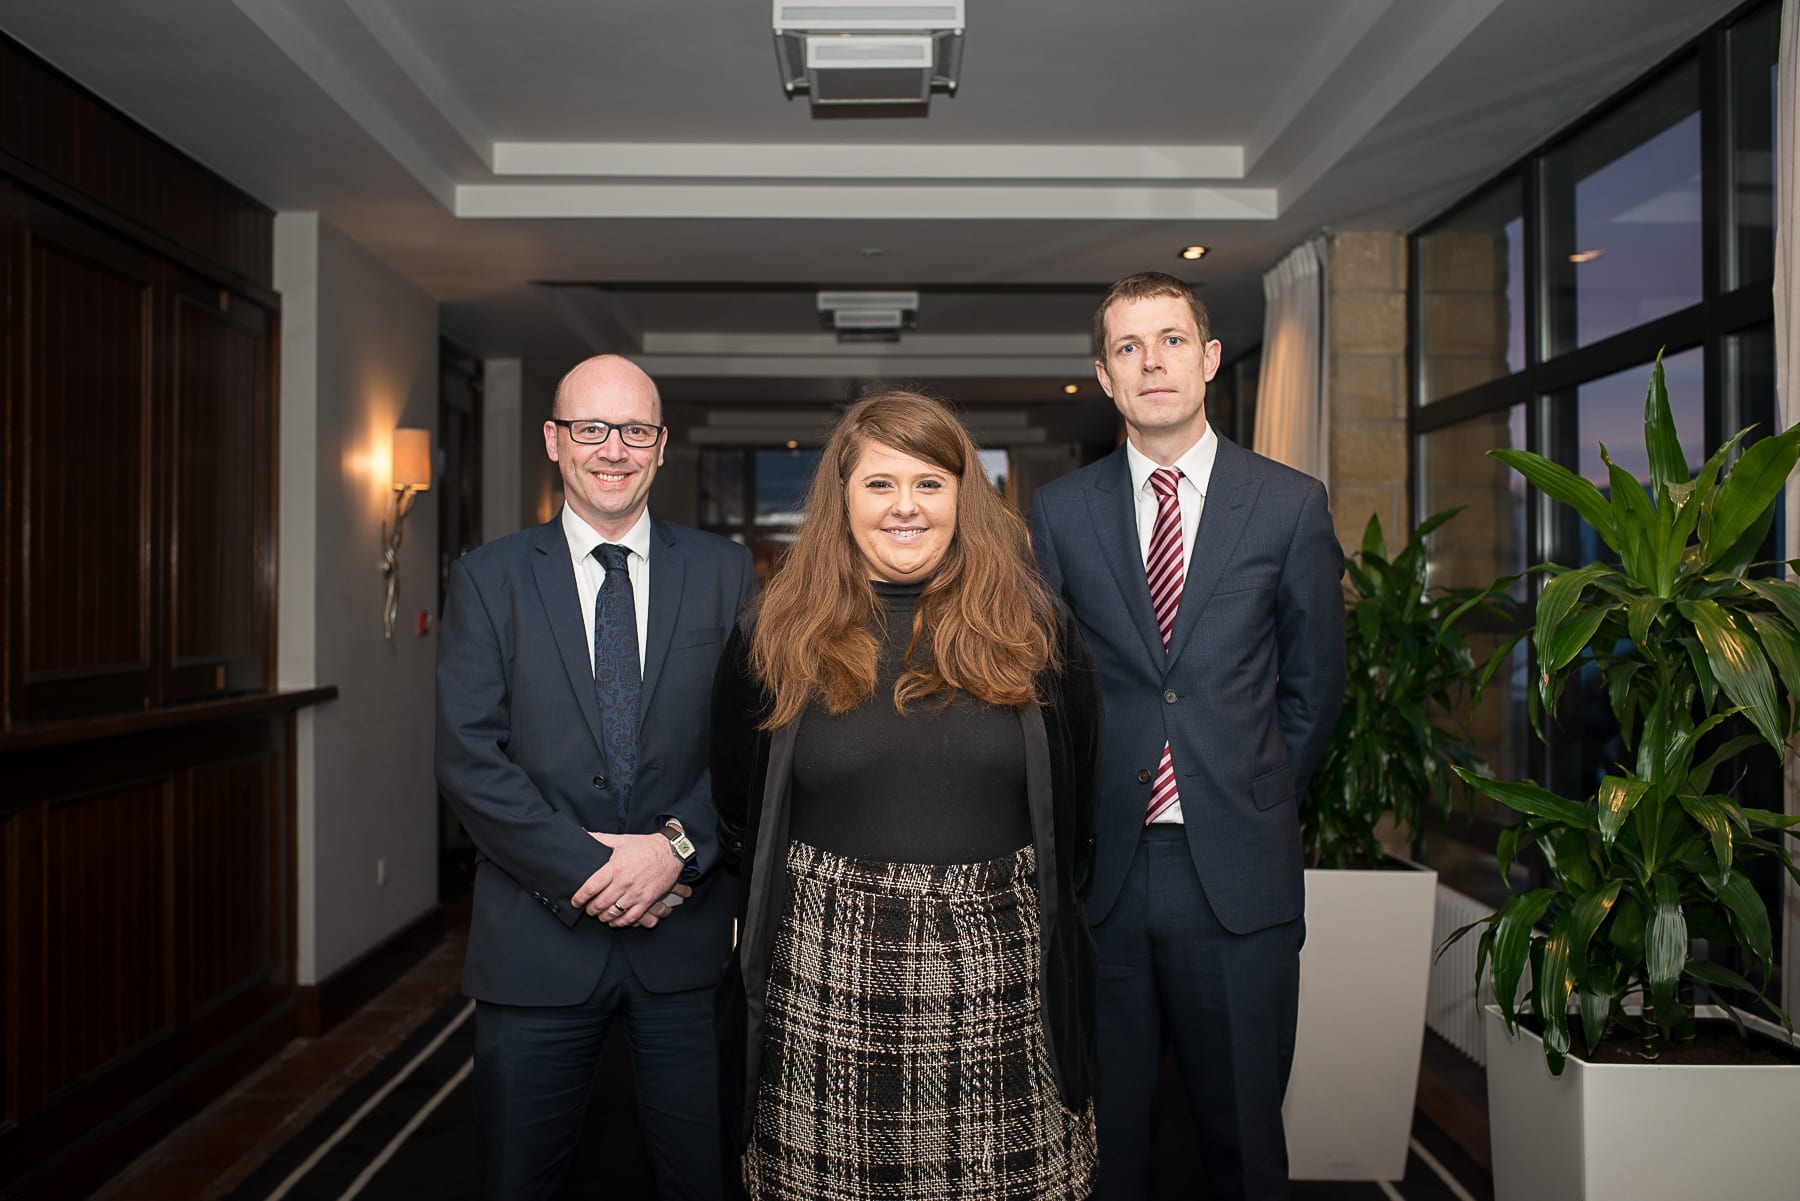 Economic Breakfast Briefing; European and Local Economic Outlook In association with the Limerick Post which took place in the Castletroy Park Hotel on Monday 11th Feb 2019:  From left to right:David Murray - Ulster Bank, Caoimhe Moloney - Limerick Chamber, Philip Maher- MAZARS. 
Image by Morning Star Photography